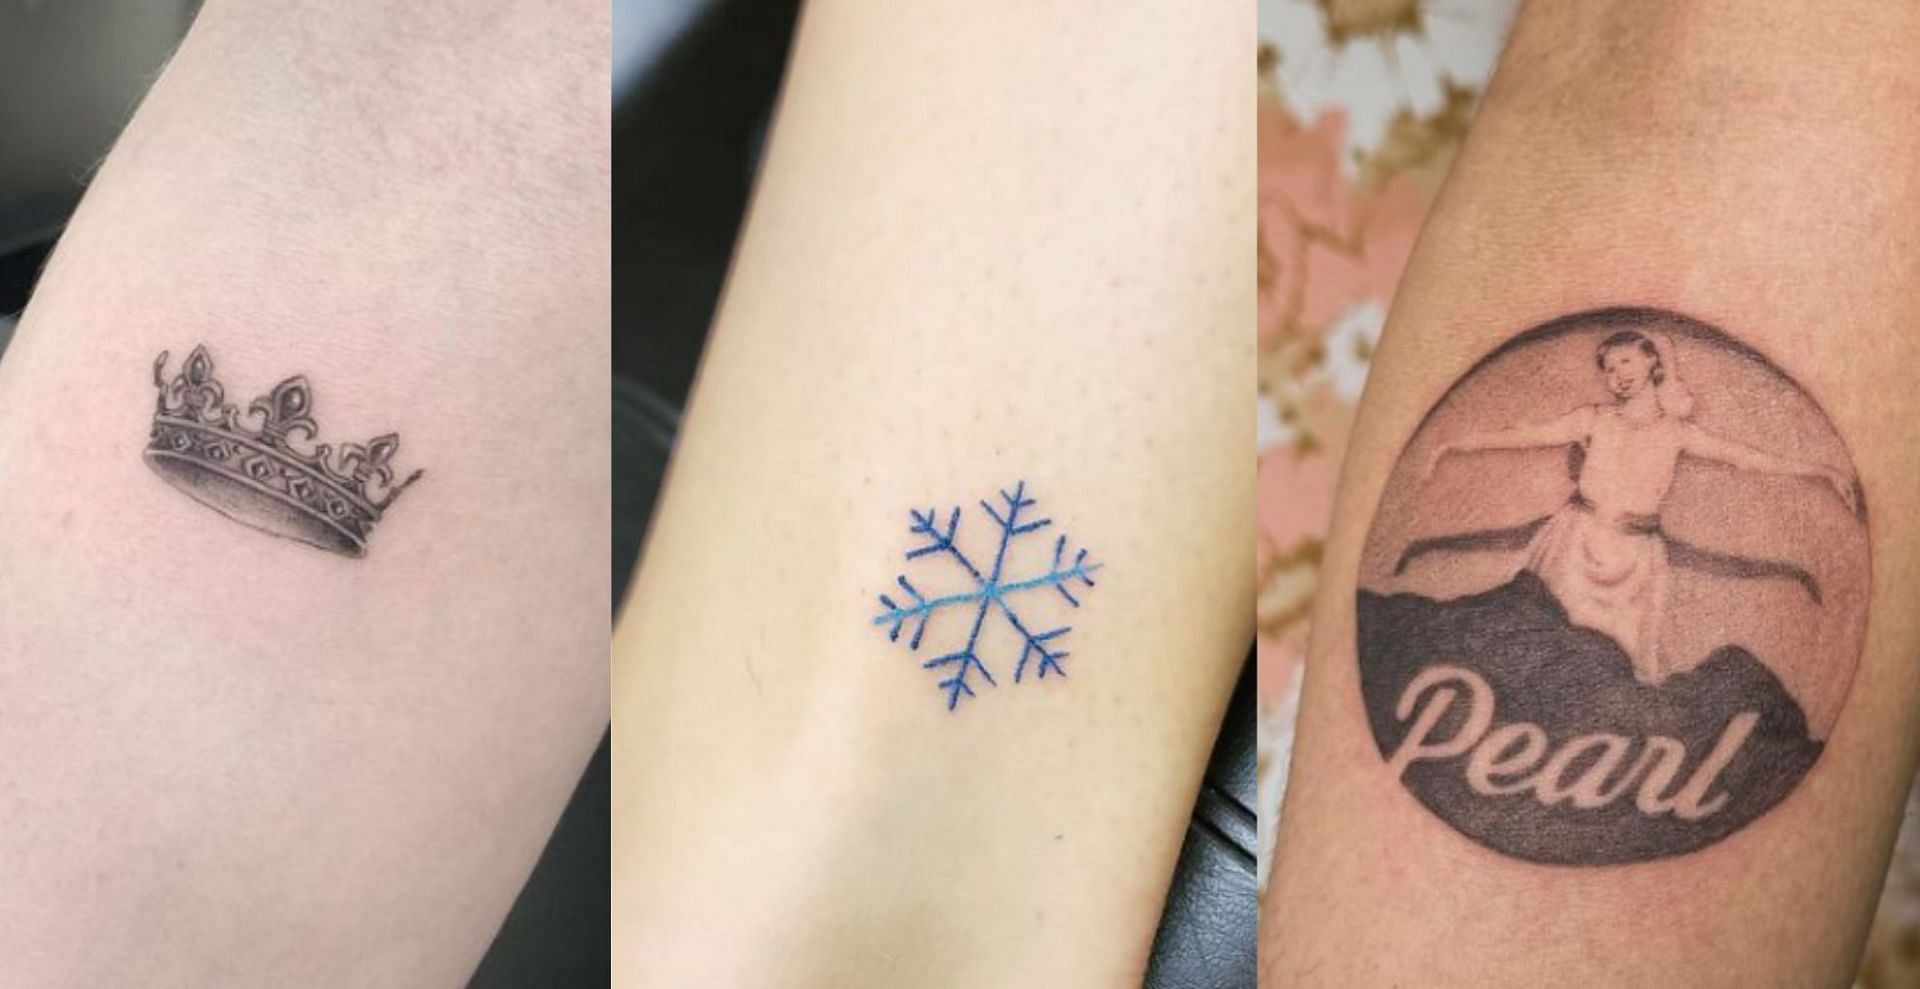 Best Tiny Tattoos For Adorable Designs With Less Pain